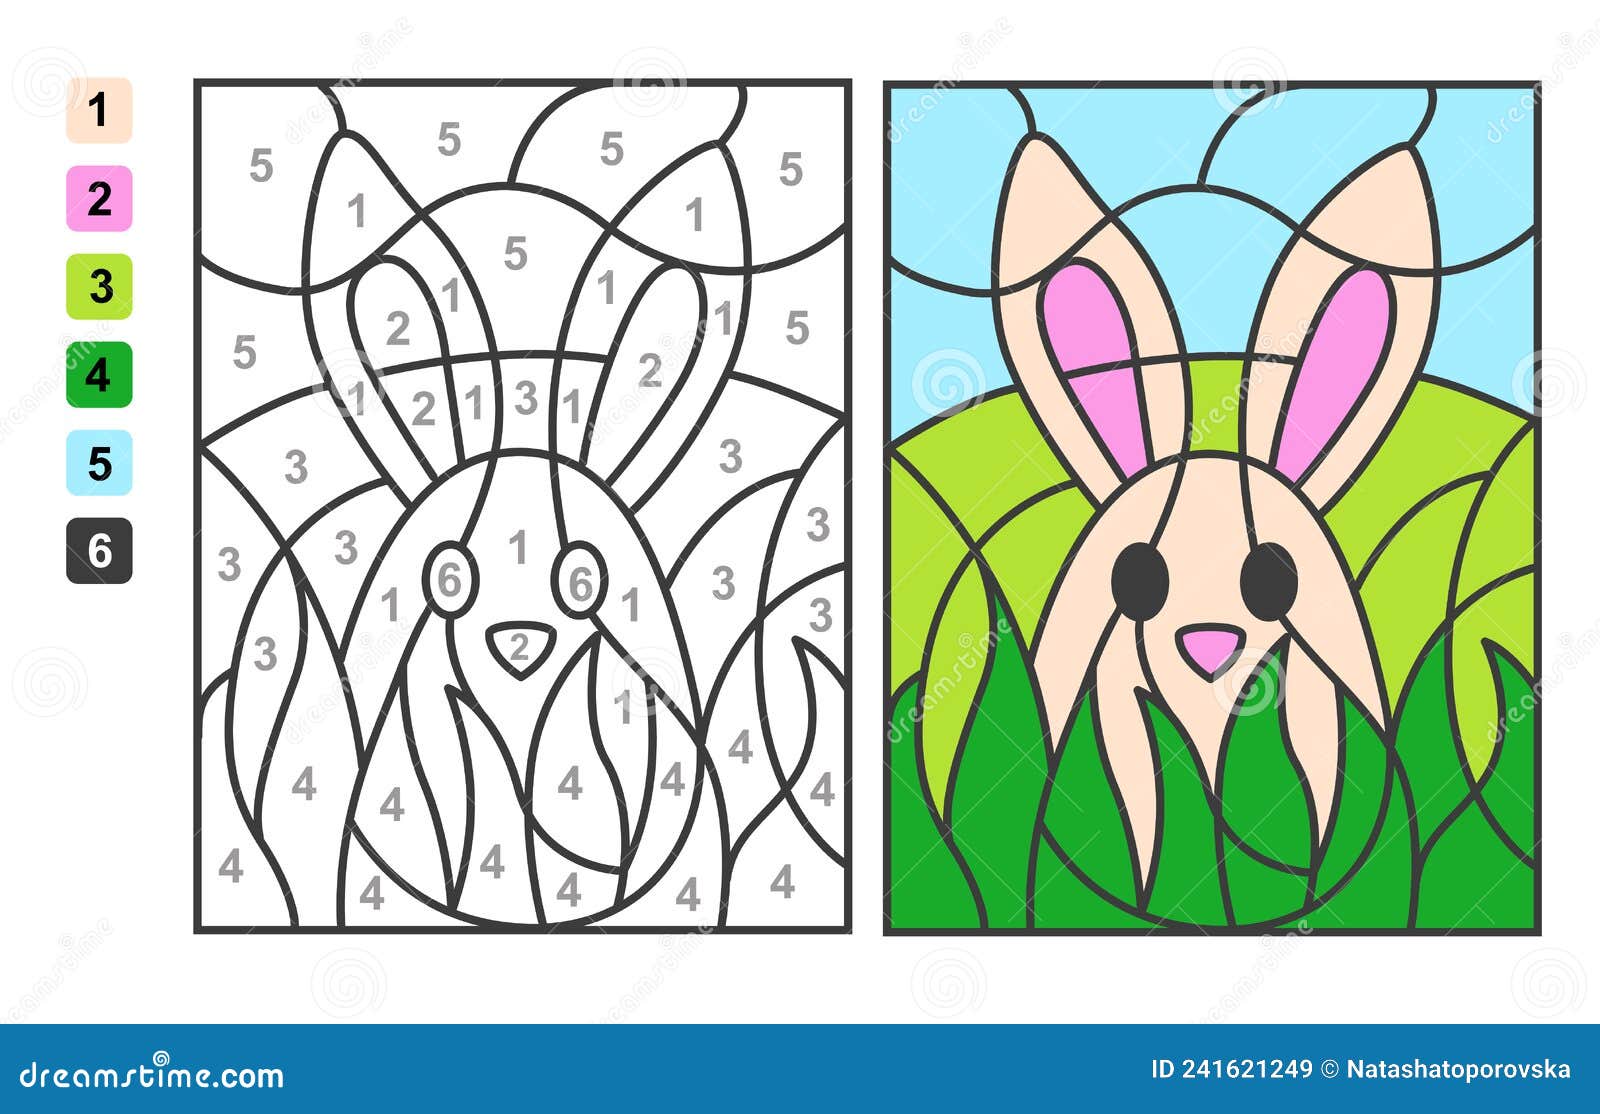  coloring page color by numbers easter egg hunt. puzzle game for children education and activities